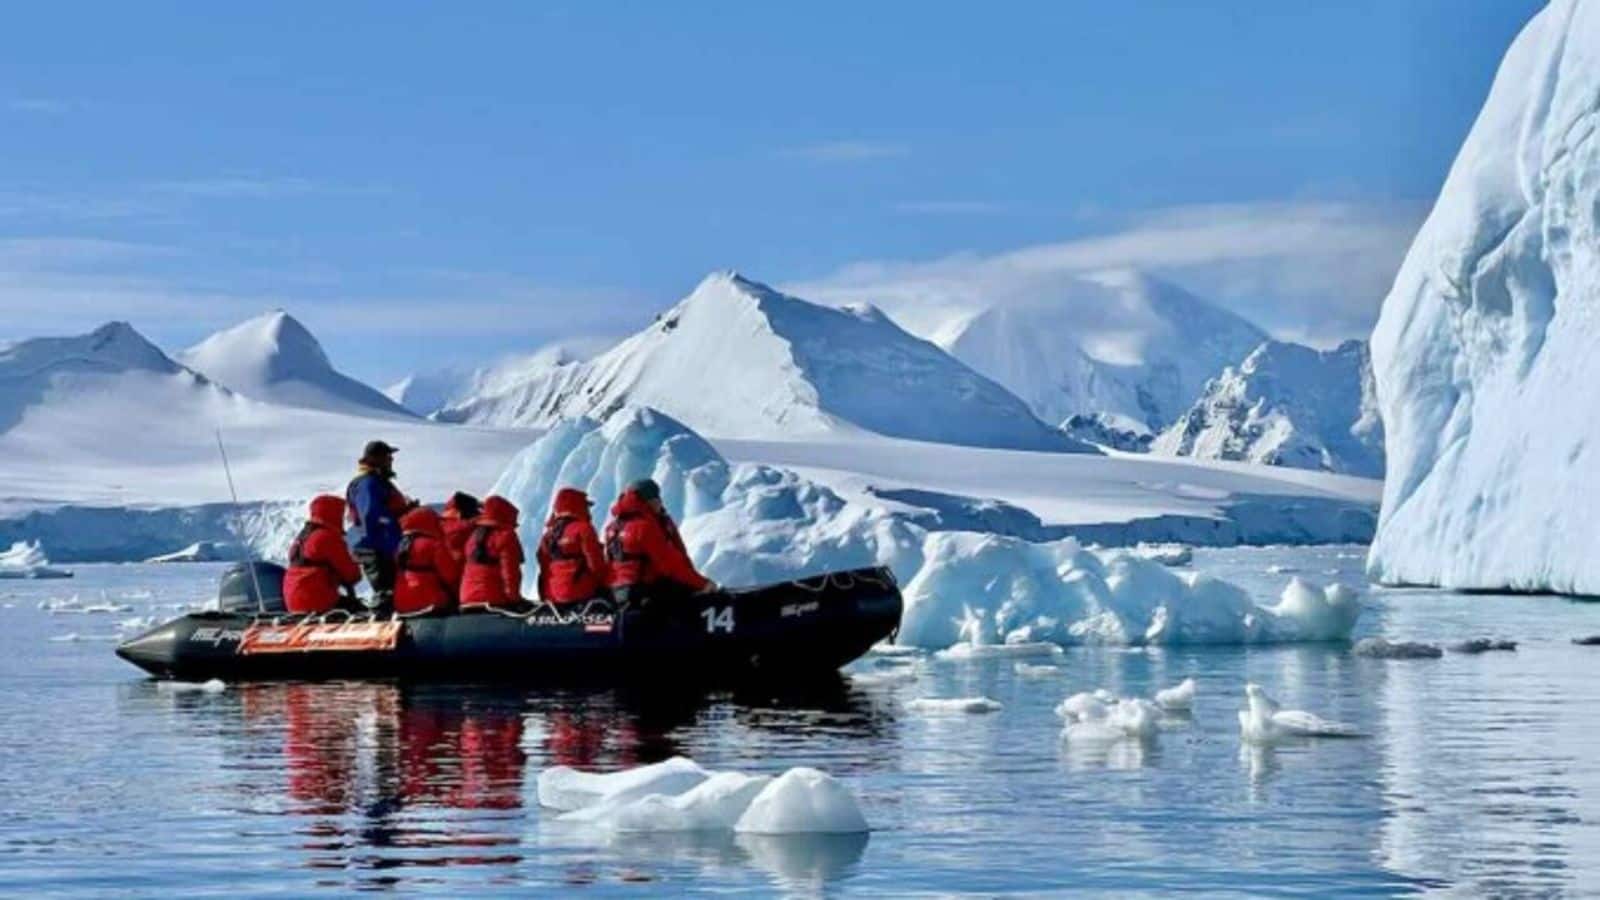 Antarctic adventure: Take a journey to the ice-covered continent